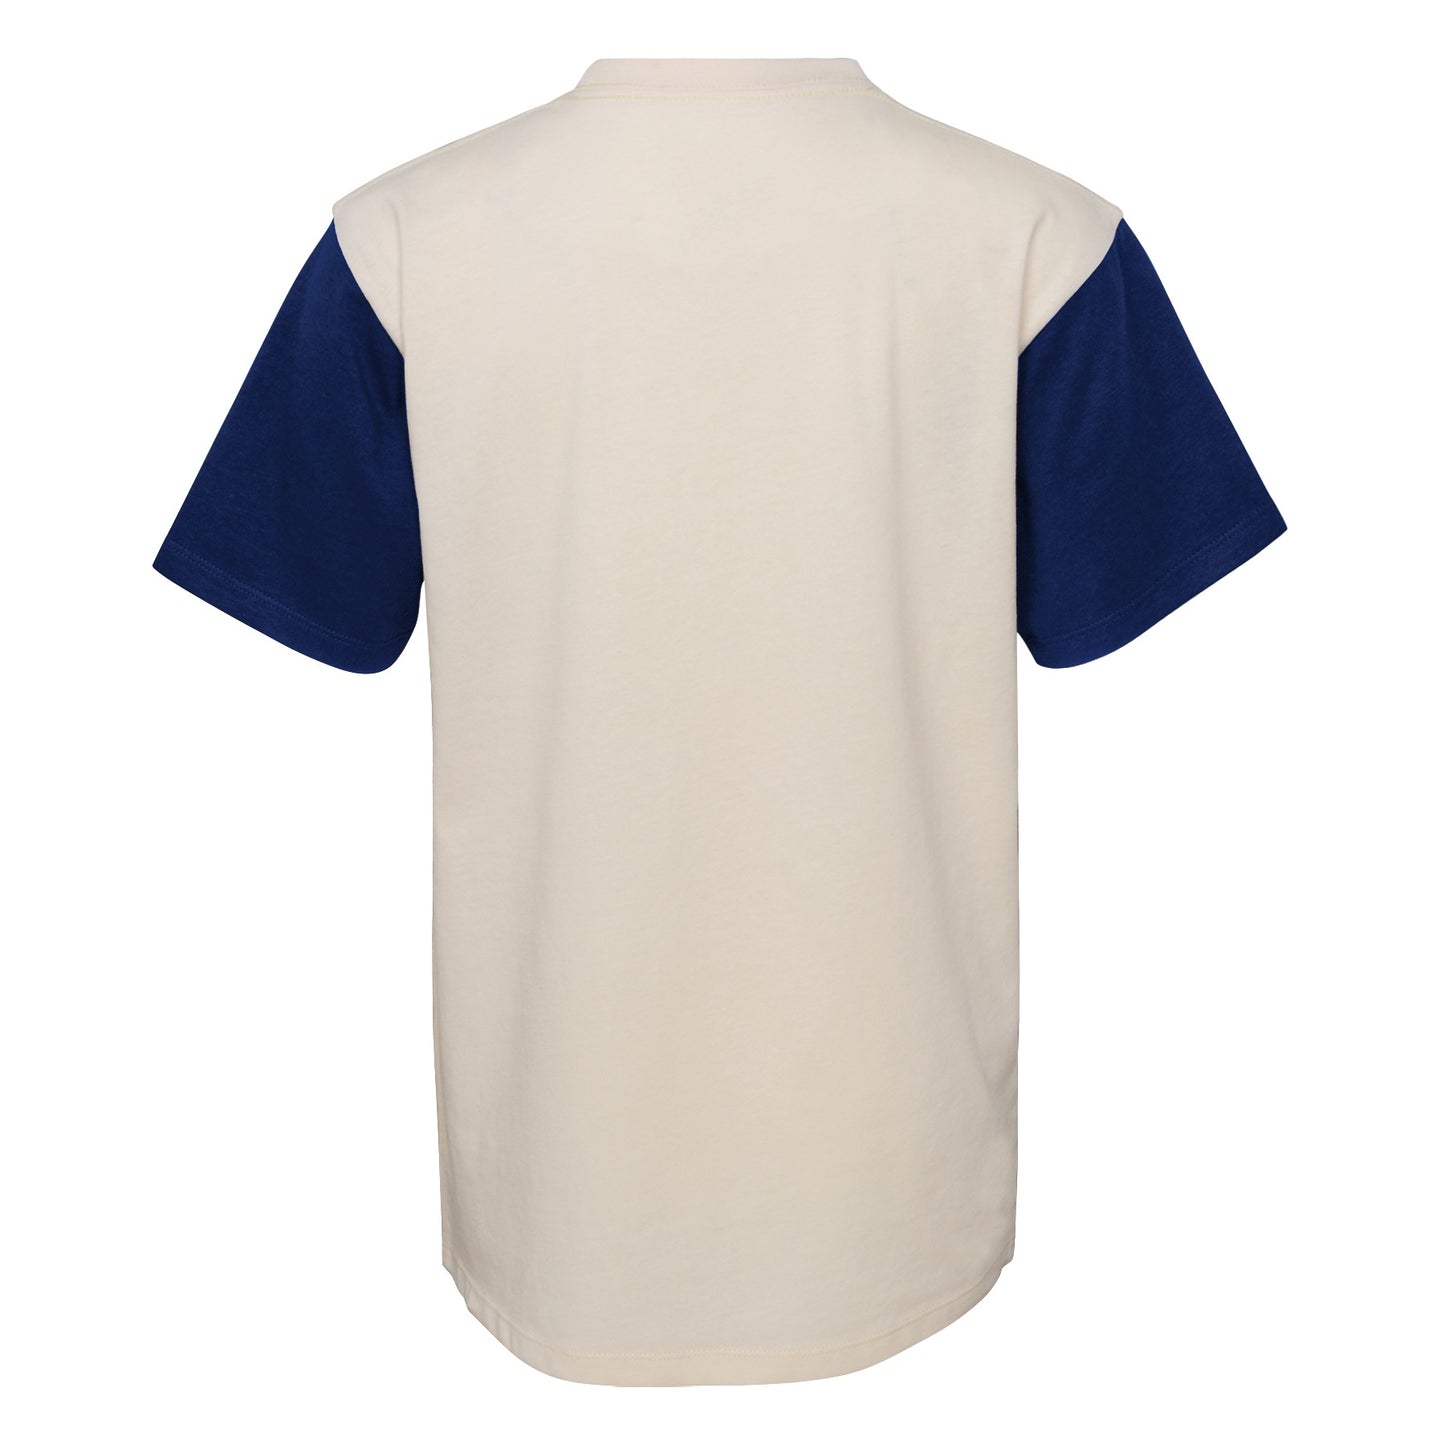 Youth Chicago White Sox Mitchell and Ness Cream/Navy Colorblock T-Shirt